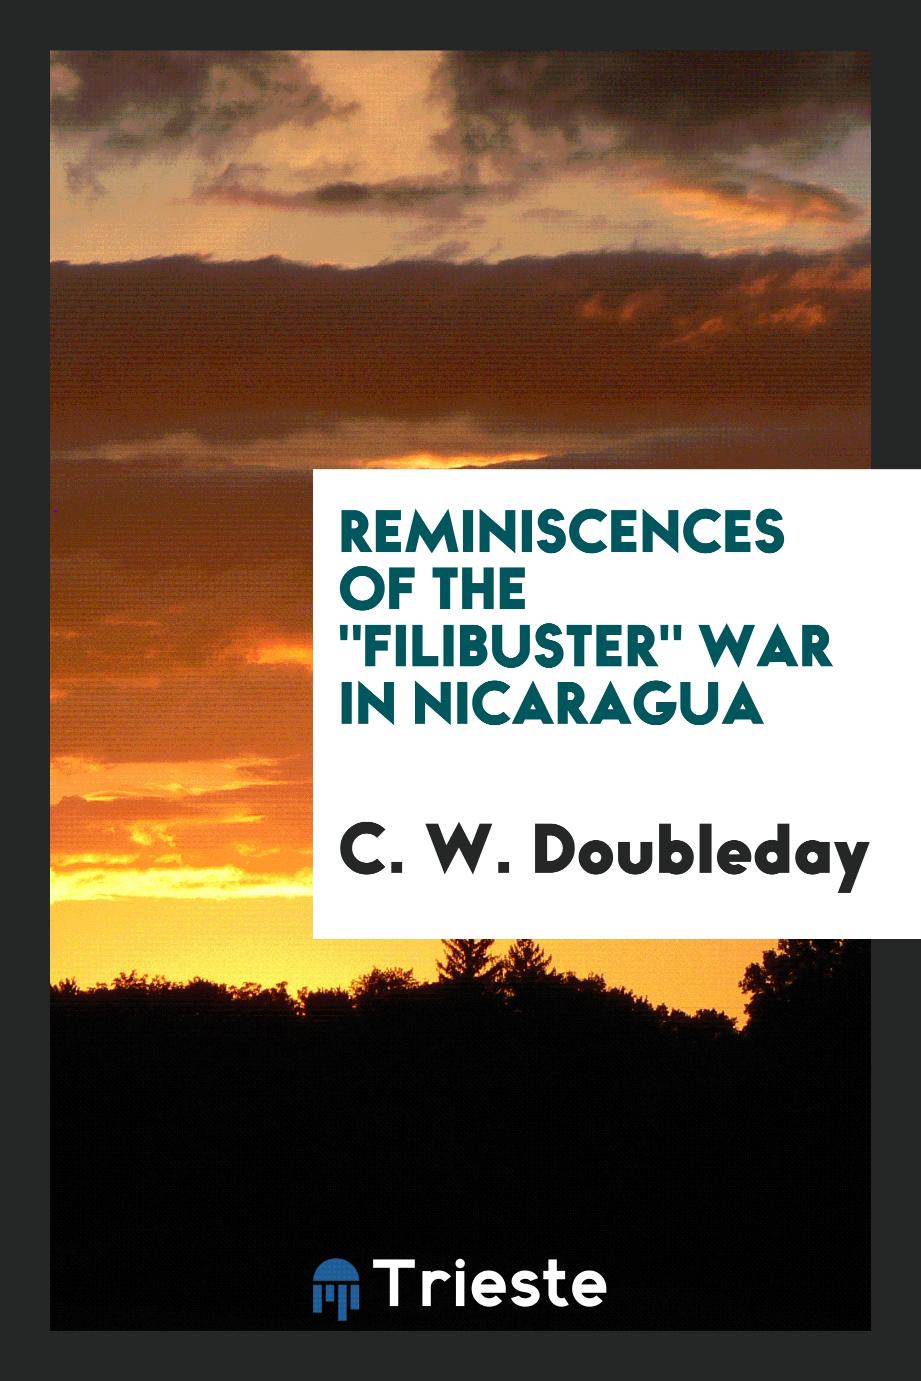 Reminiscences of the "Filibuster" War in Nicaragua